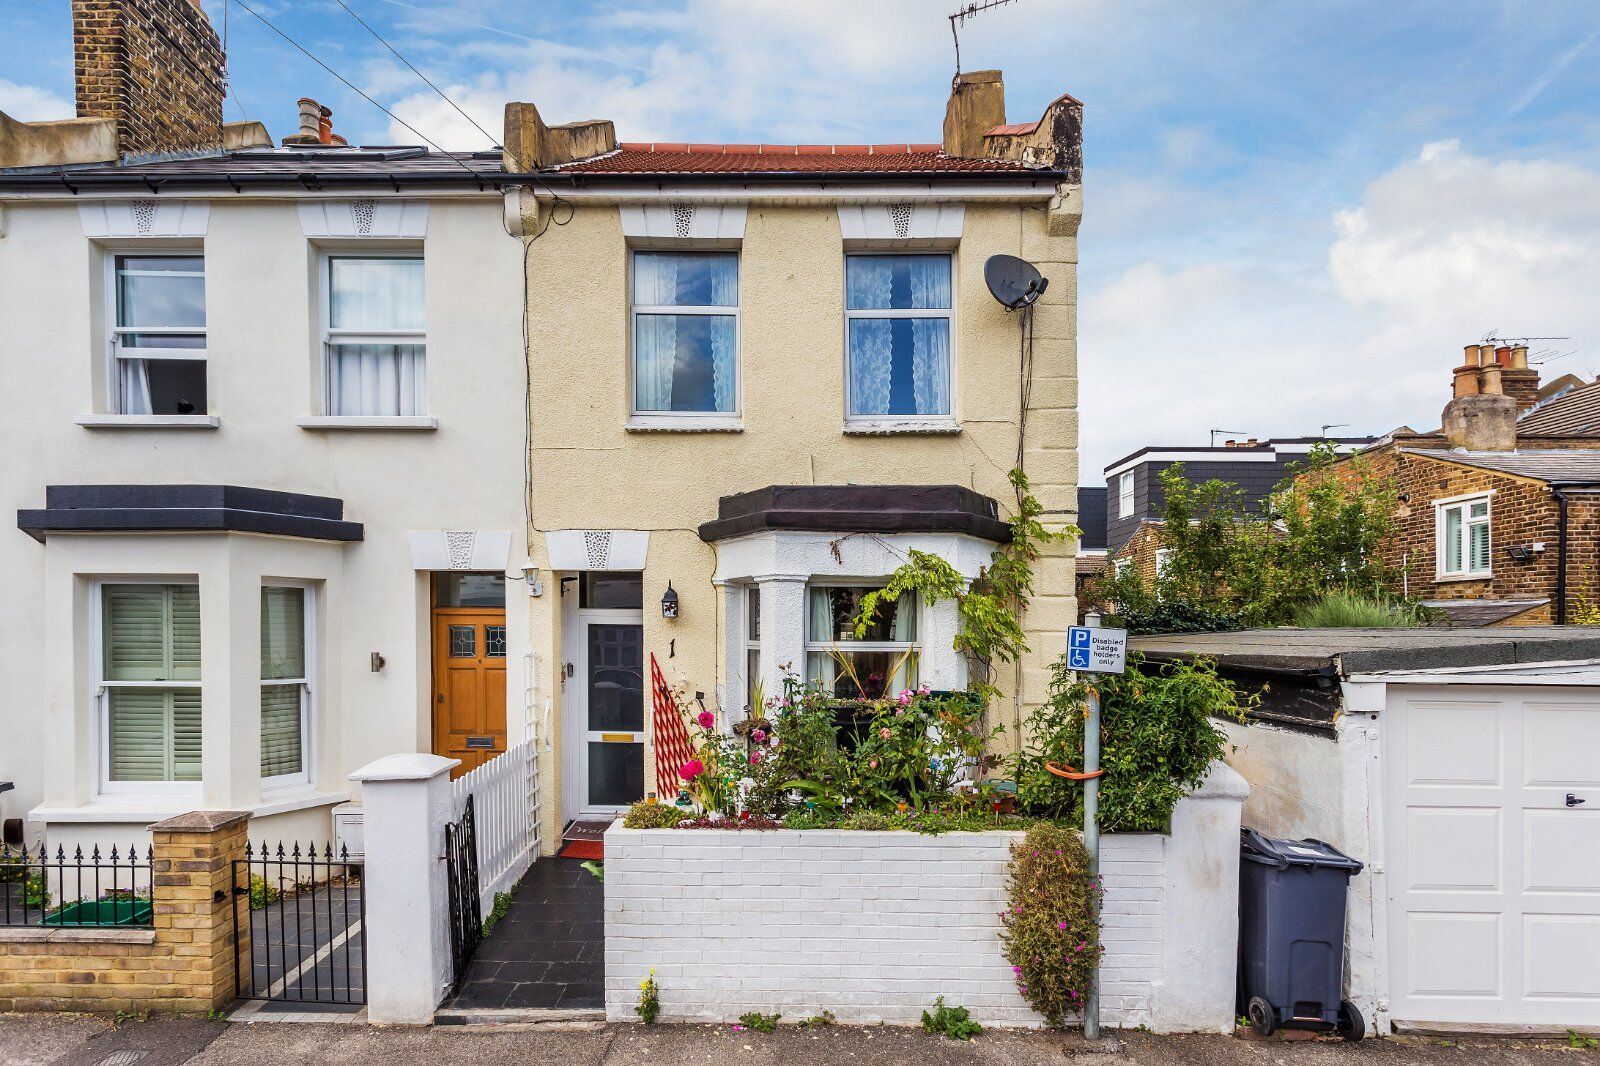 3 bedroom end terraced house for sale Granville Road, London, SW19, main image